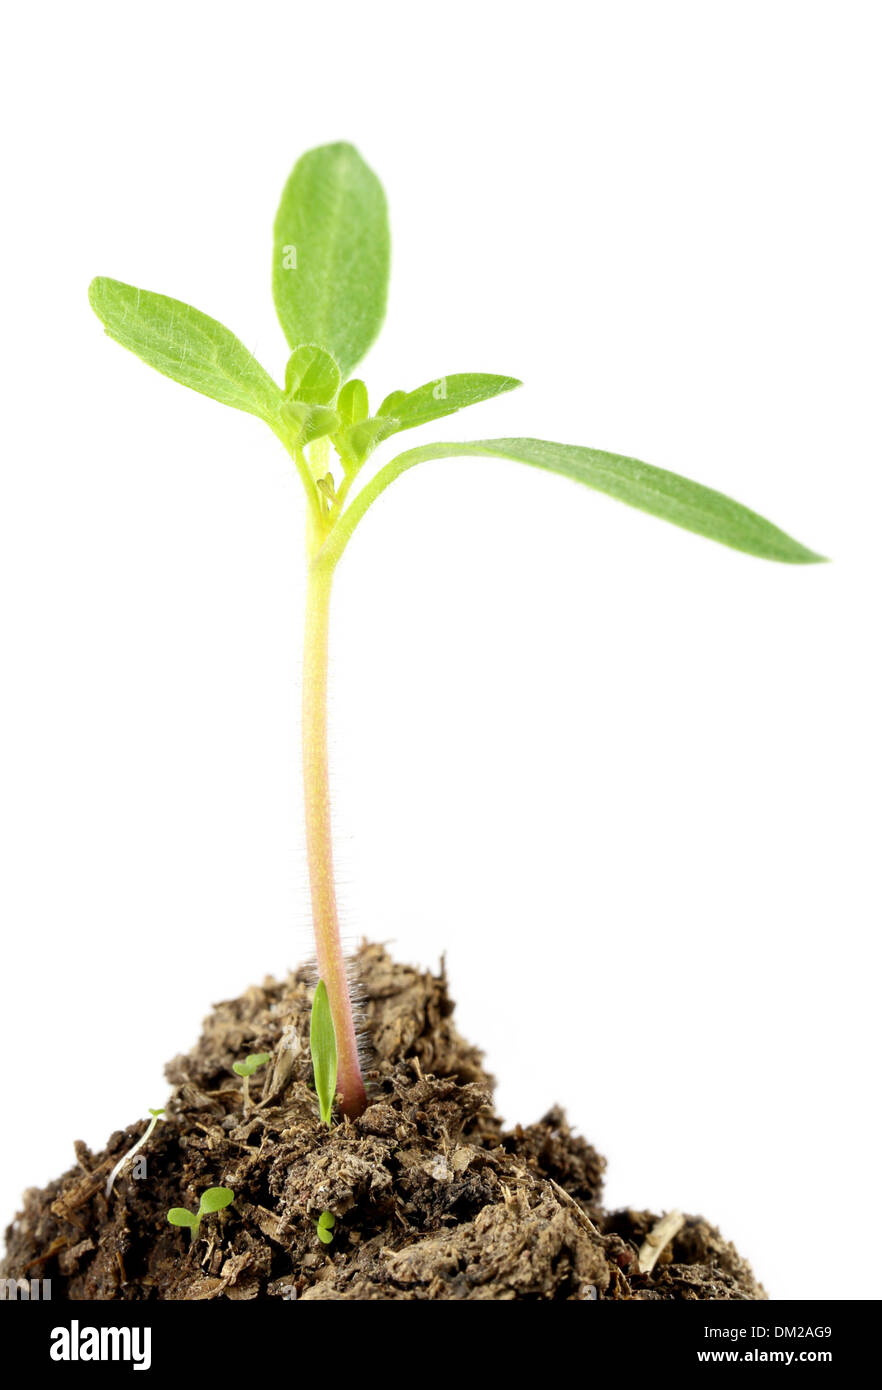 A little tomato seedling over white background Stock Photo